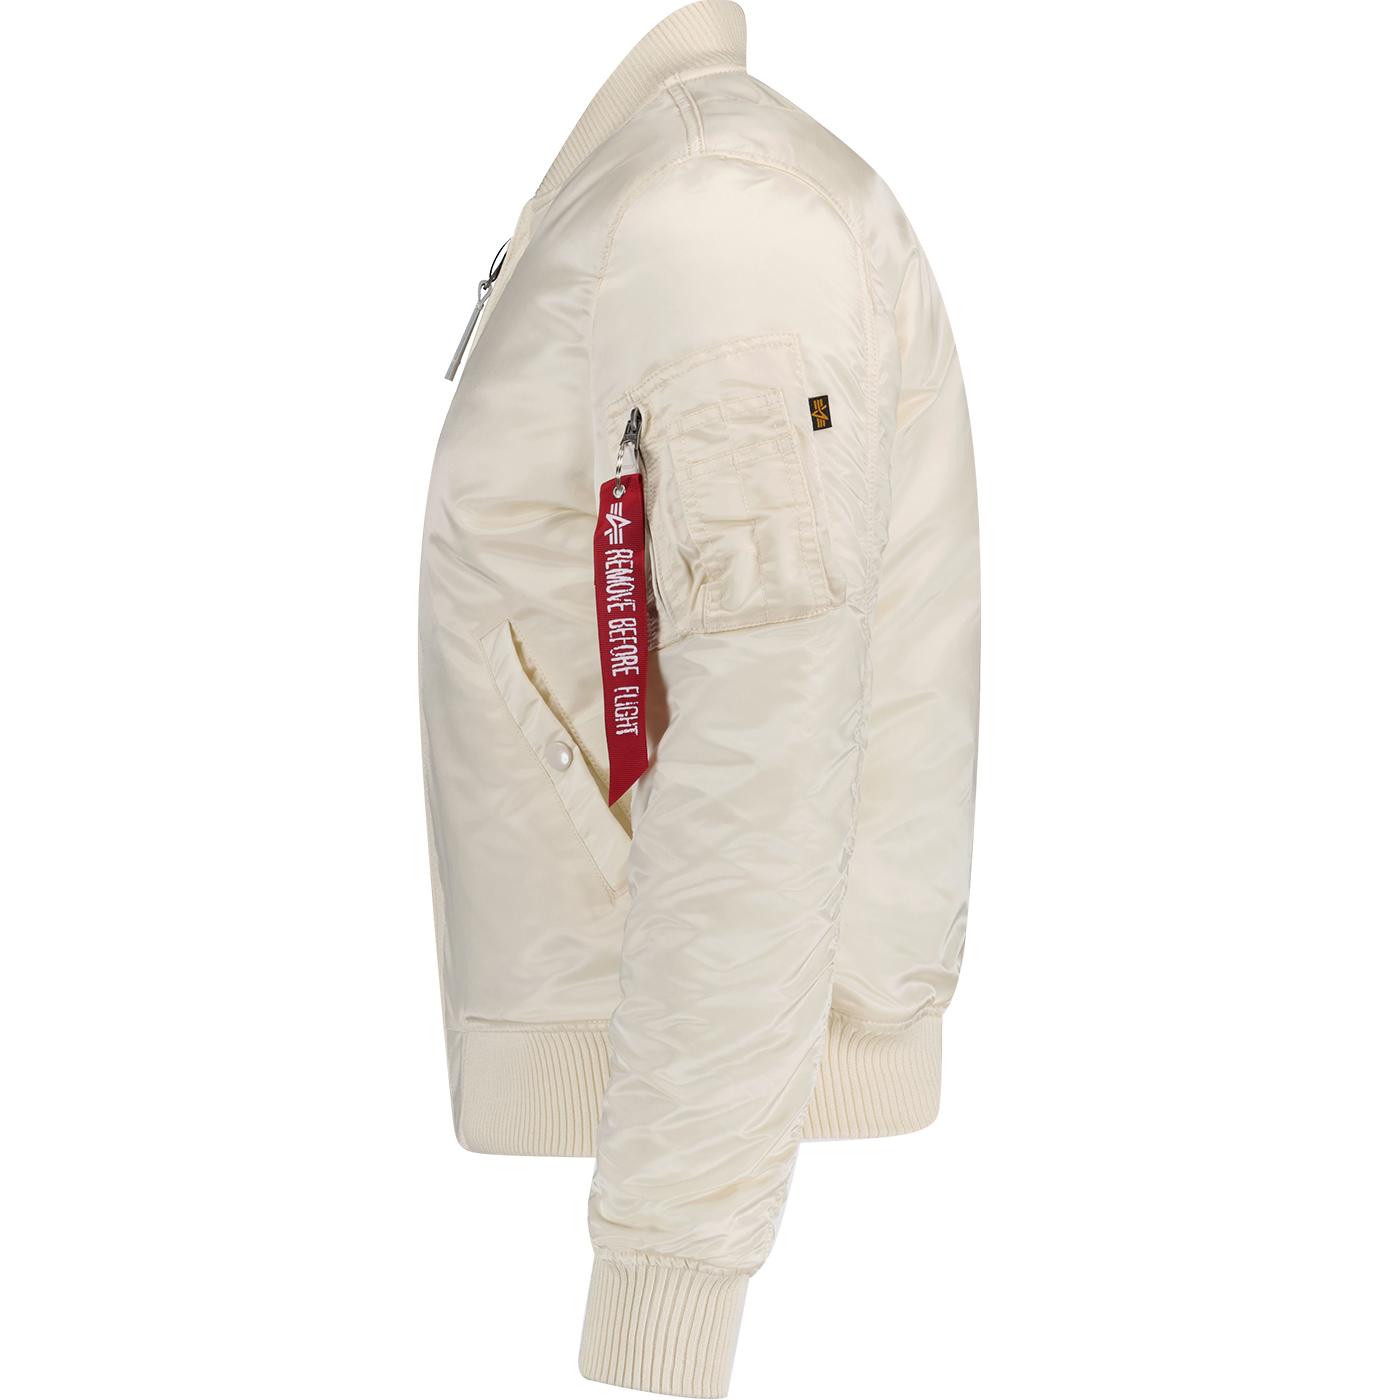 ALPHA Industries in Bomber Stream Jacket White MA1 VF Mod